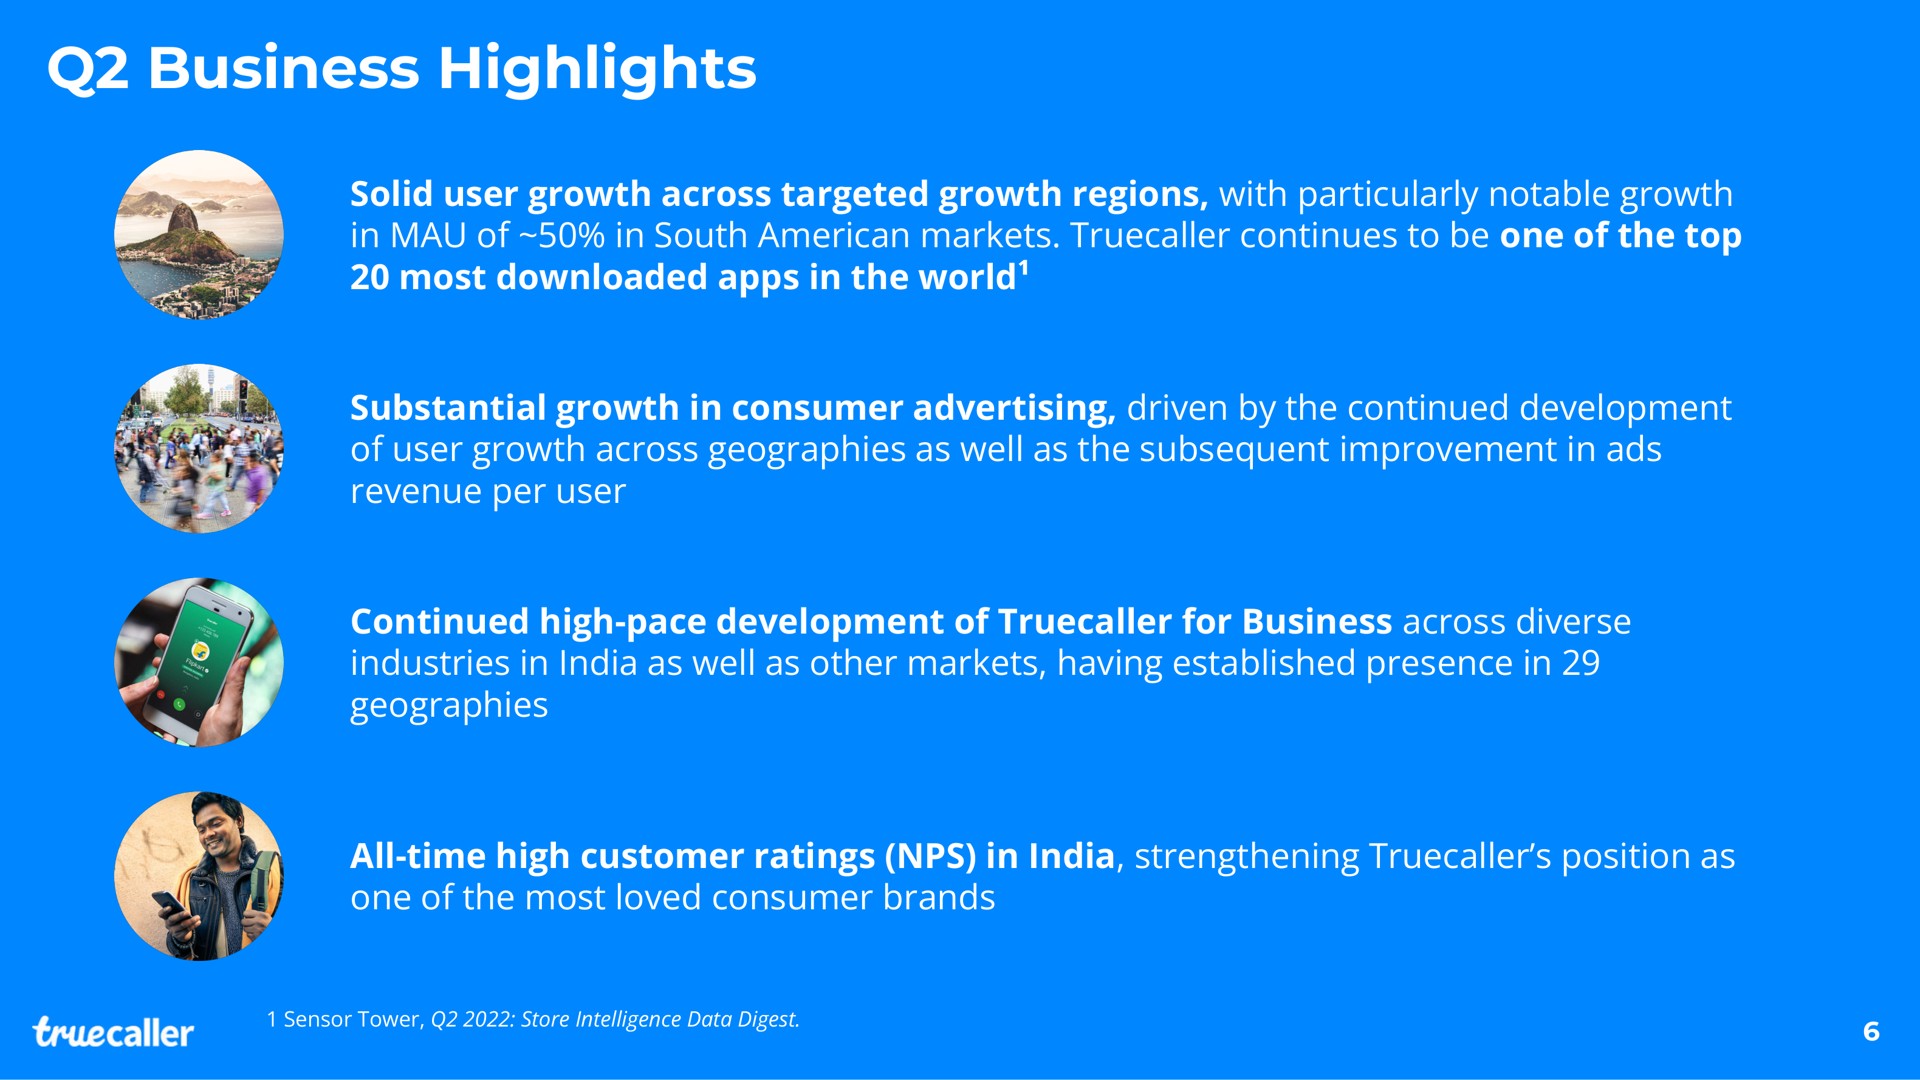 business highlights solid user growth across targeted growth regions with particularly notable growth in mau of in south markets continues to be one of the top most in the world substantial growth in consumer advertising driven by the continued development of user growth across geographies as well as the subsequent improvement in ads revenue per user continued high pace development of for business across diverse industries in as well as other markets having established presence in geographies all time high customer ratings in strengthening position as one of the most loved consumer brands a | Truecaller